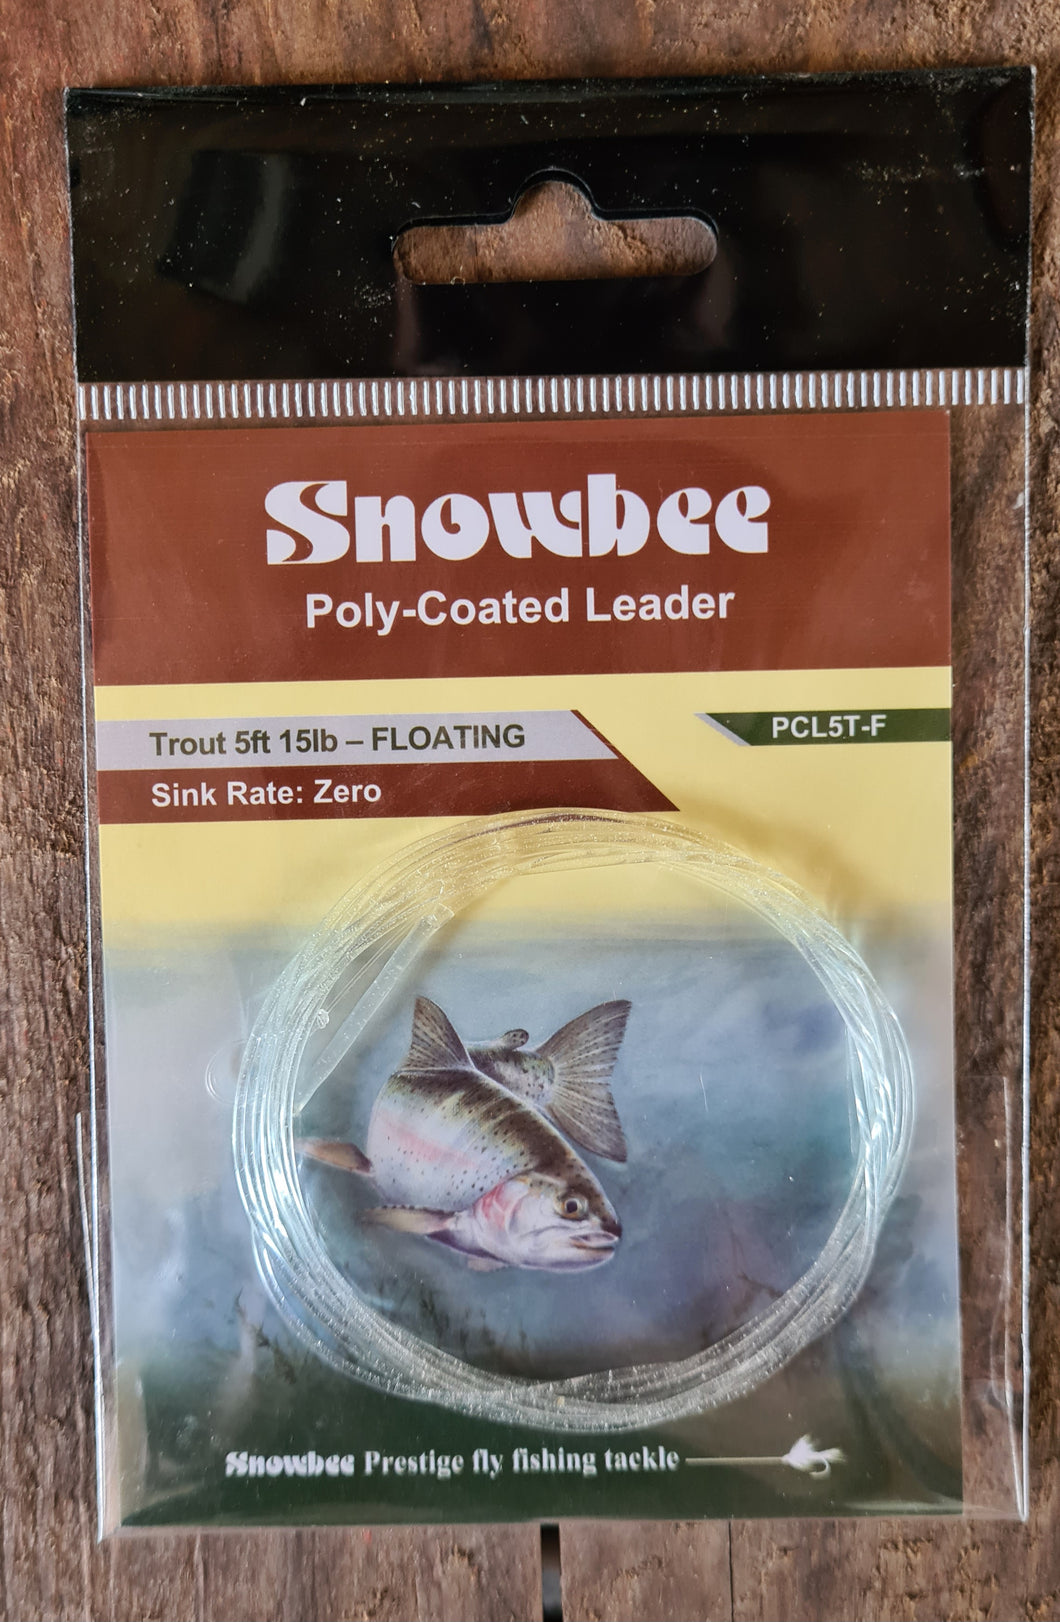 Snowbee Polyleader PCL5T-F